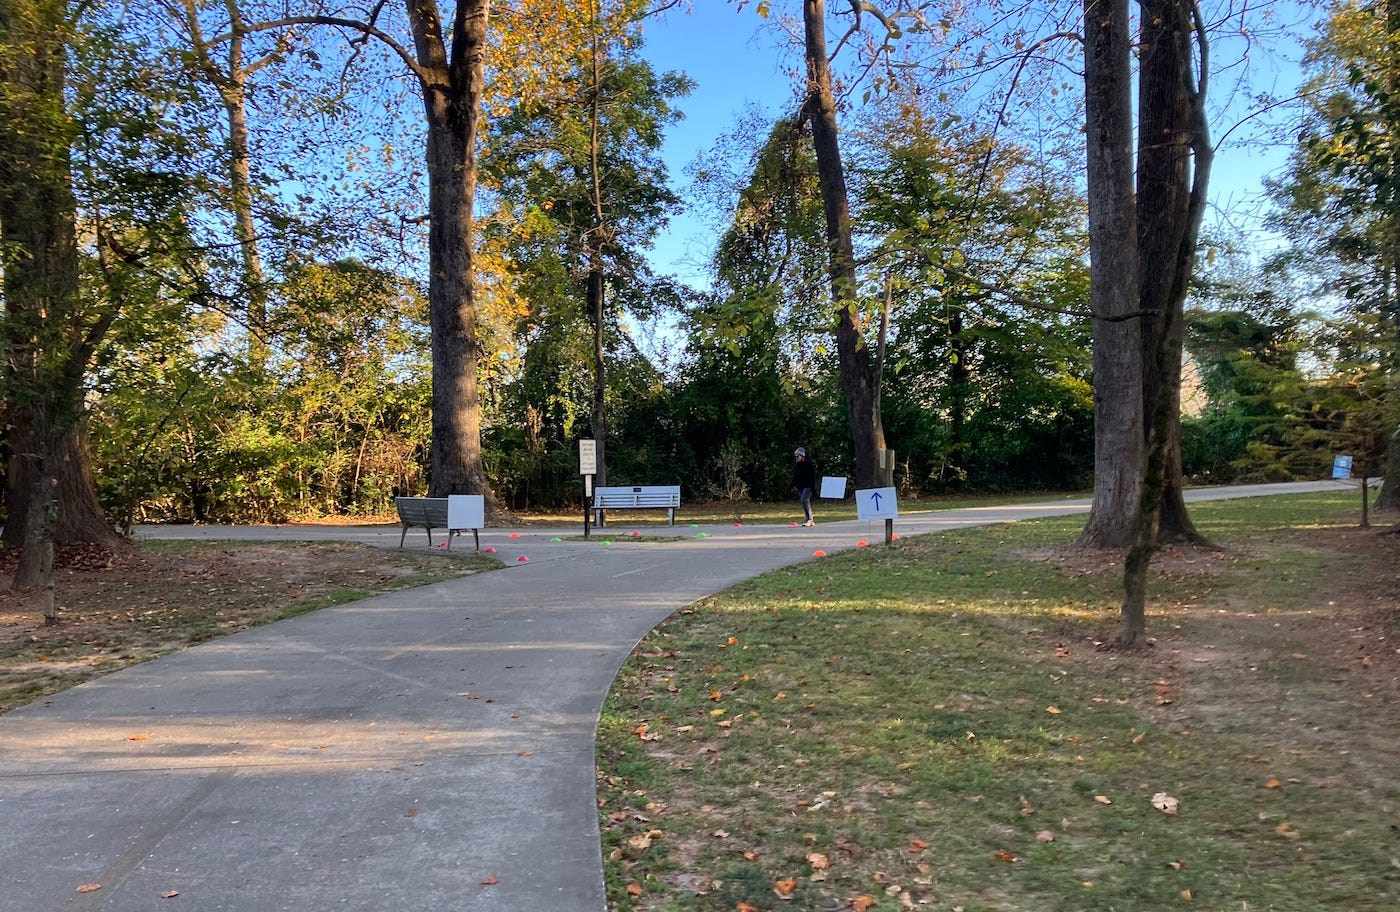 The parkrun's main junction on the trail